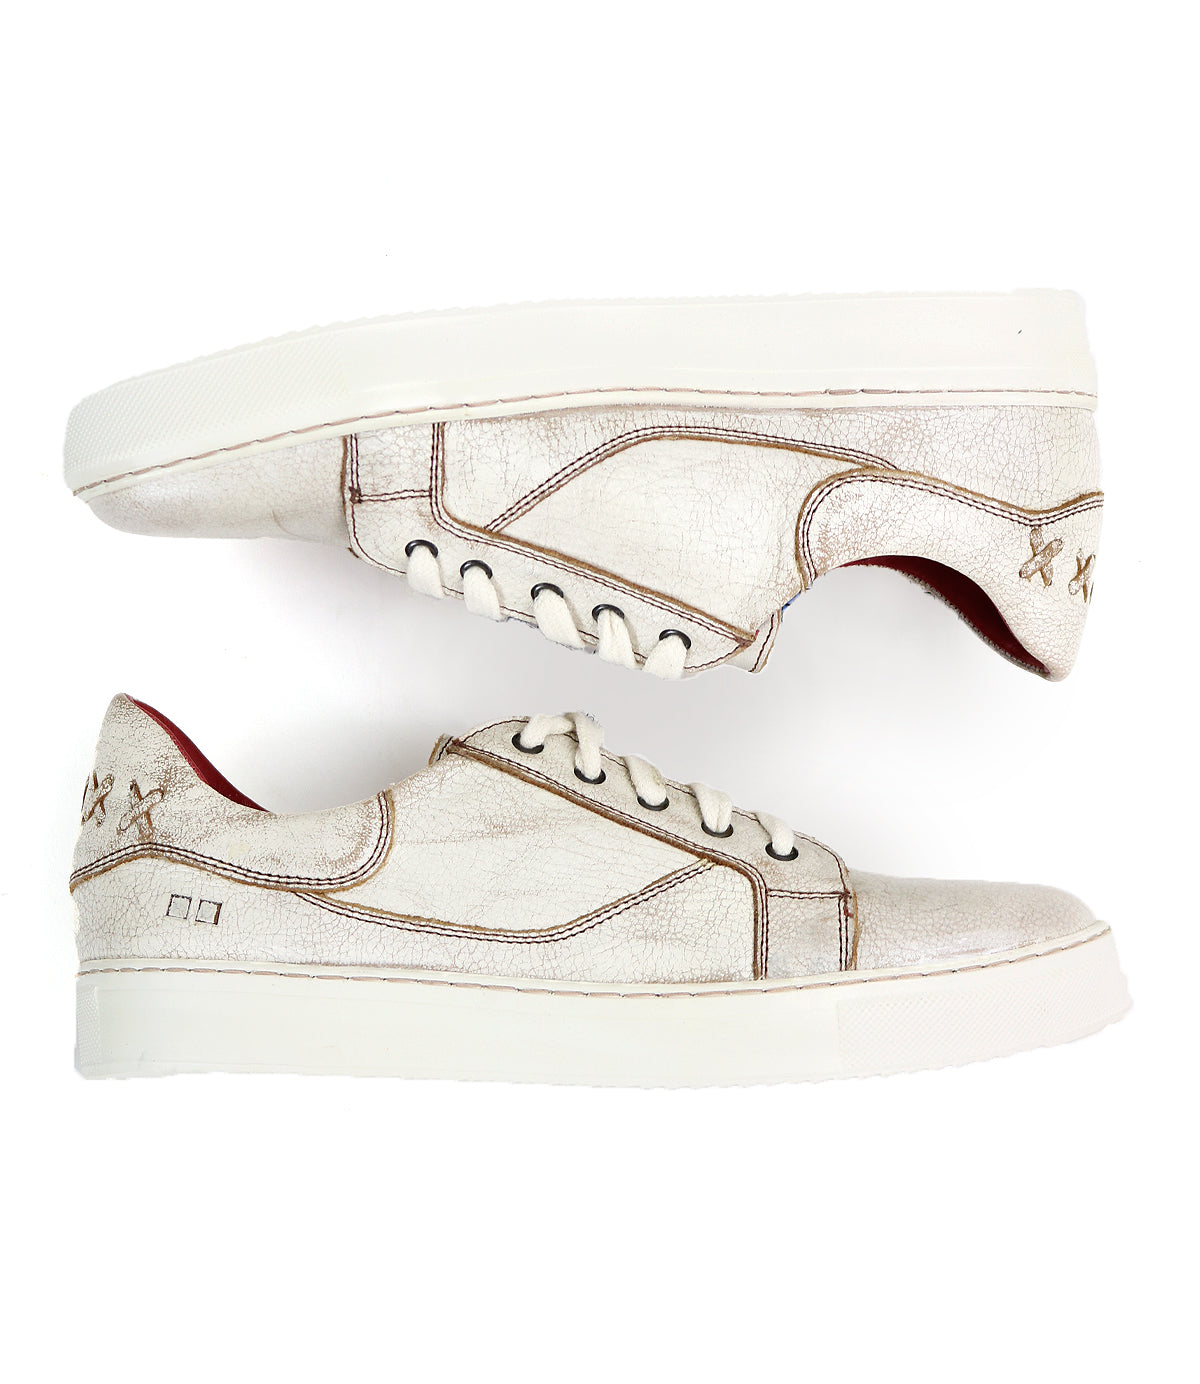 A stylish pair of Azeli sneakers from Bed Stu that combine both comfort and style.